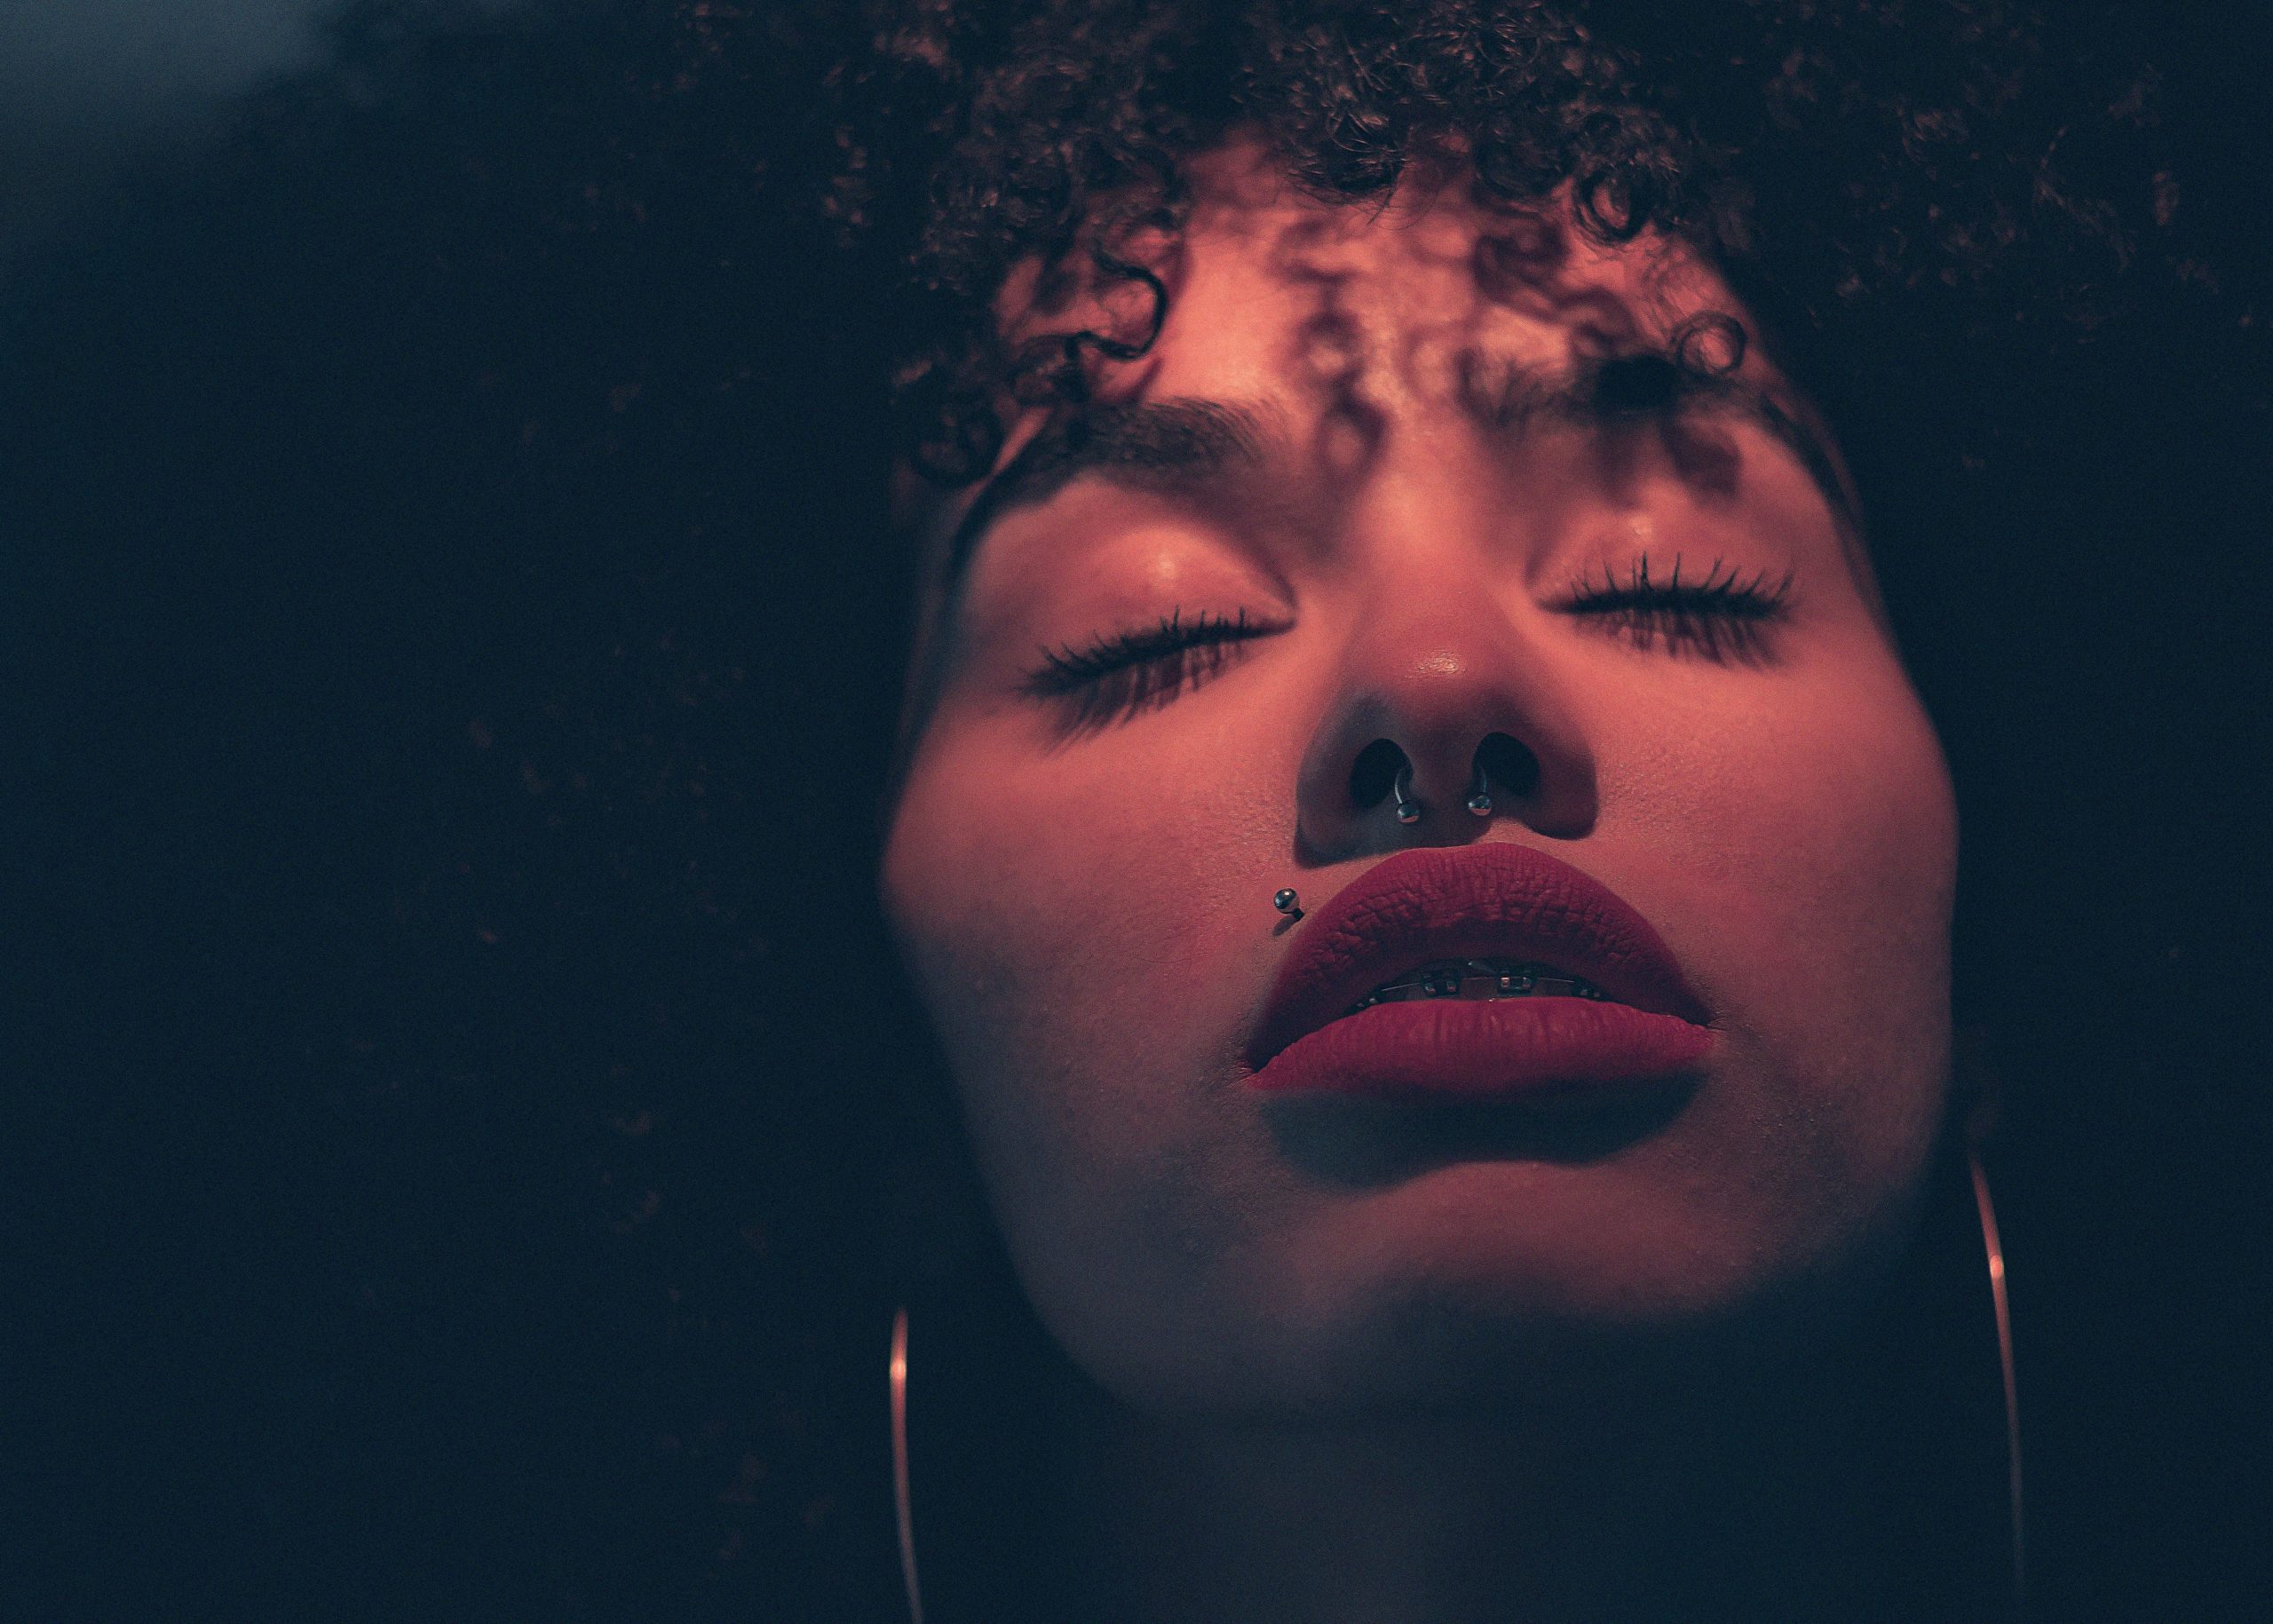 a woman with a nose ring and a Madonna lip piercing with her head raised and eyes closed under a red light